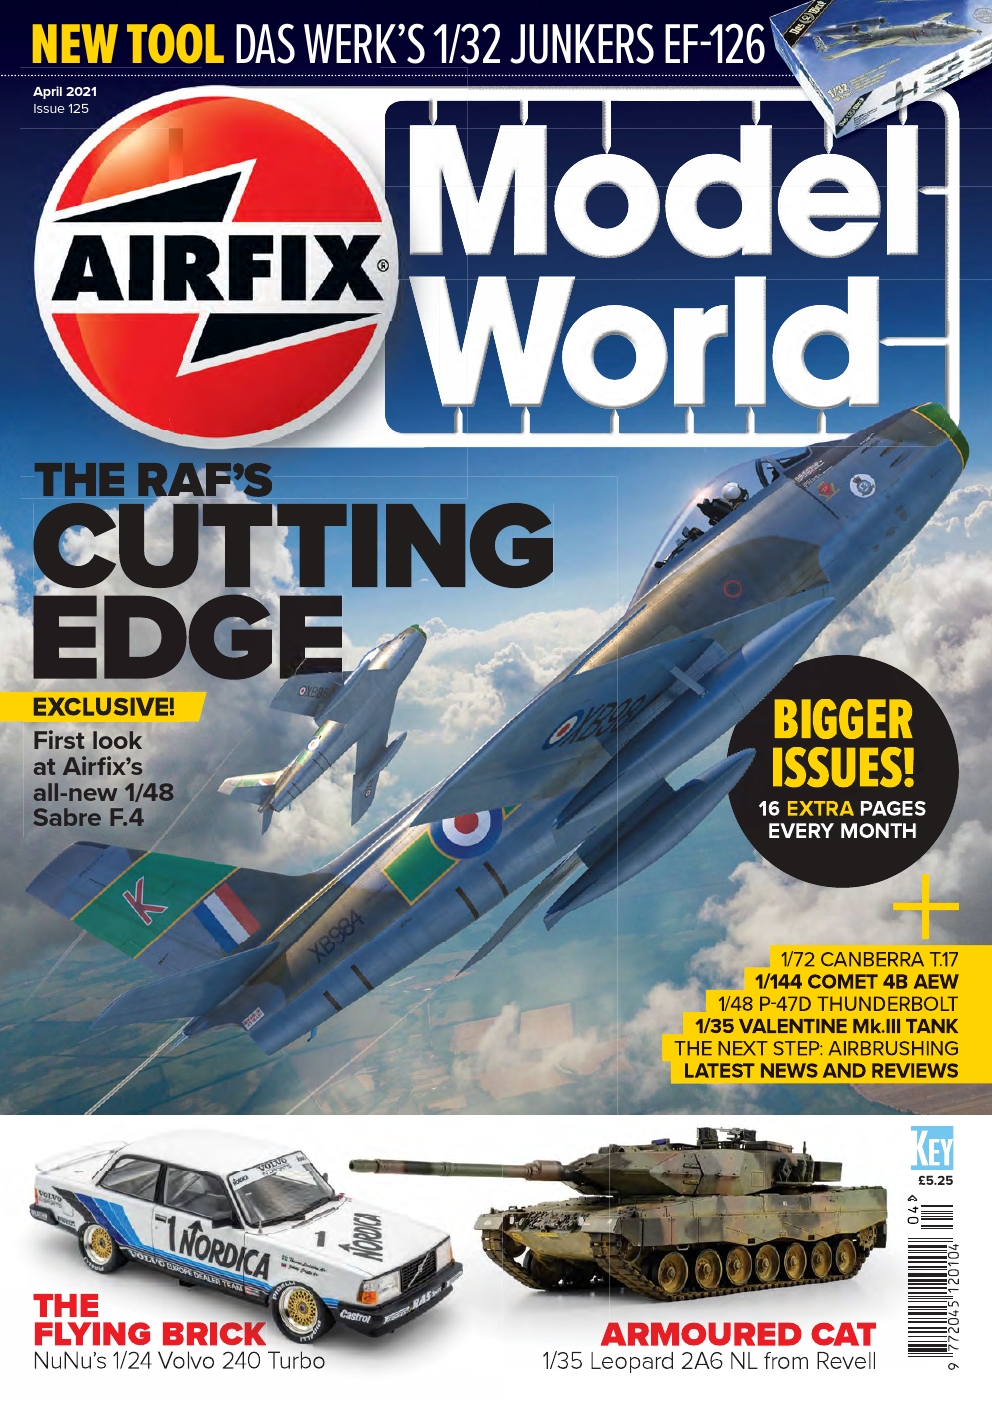 Airfix Model World Issue 125 April 2021